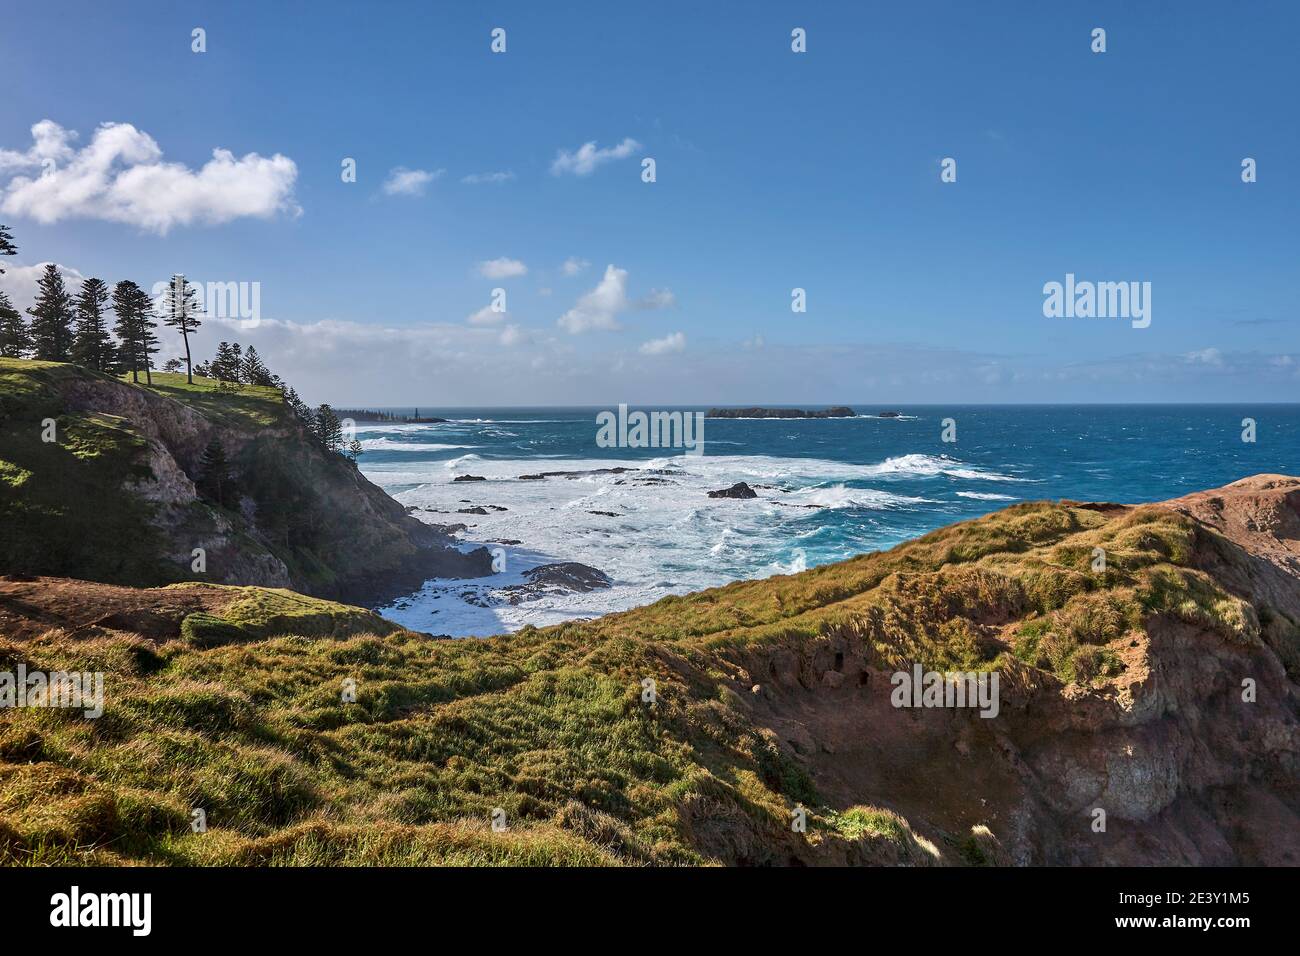 View from Slaughters Bay out to the Pacific Ocean on a bright and sunny winters day with Norfolk Pine trees on the cliff edges, Norfolk Island Stock Photo